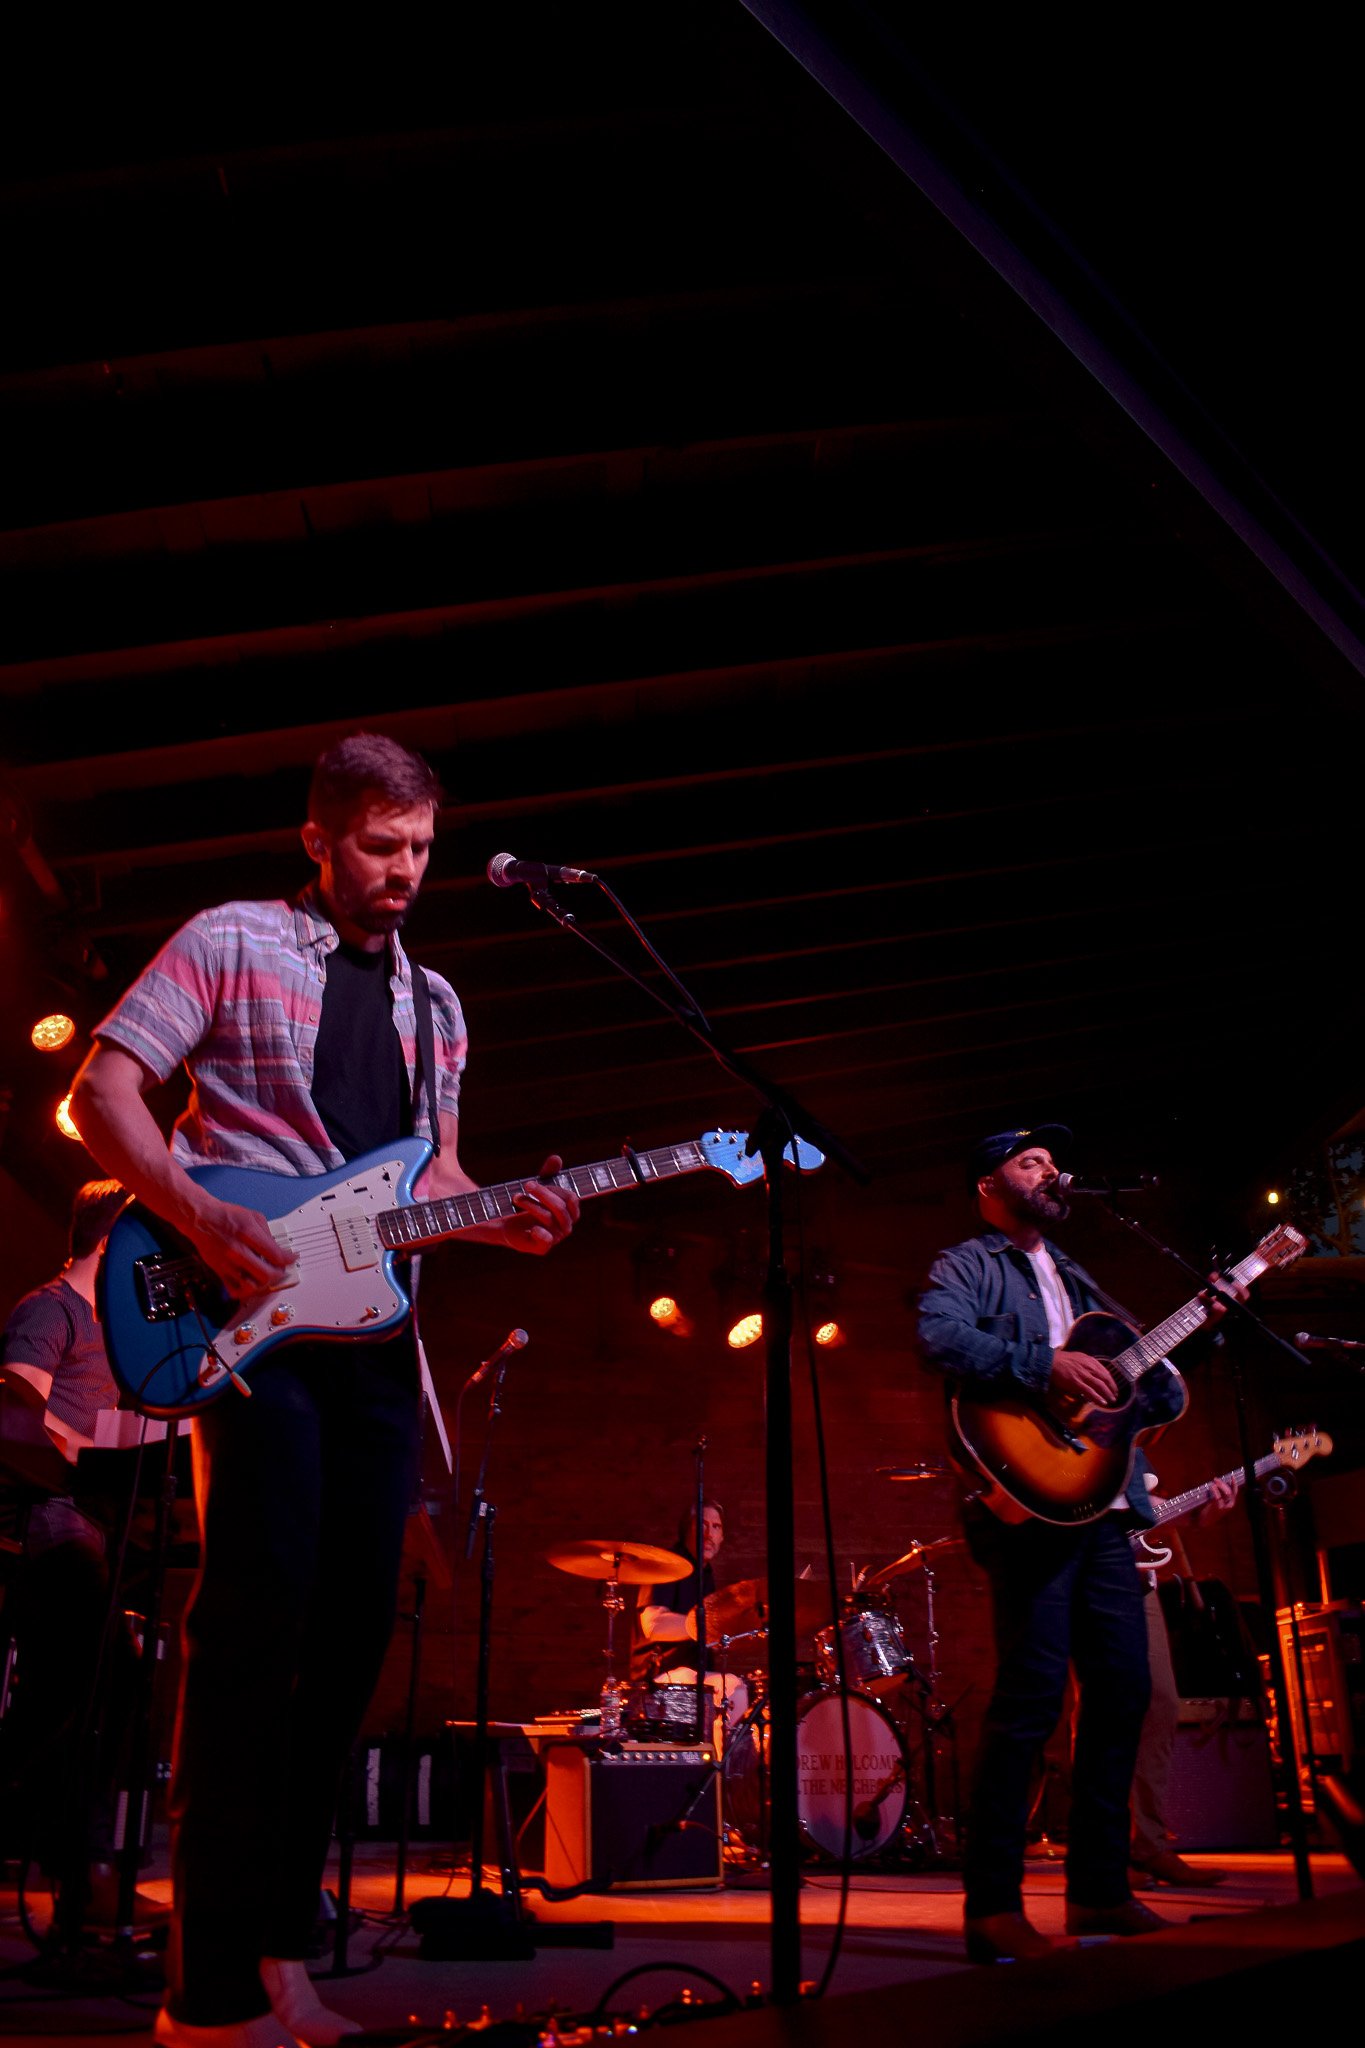  Drew Holcomb &amp; the Neighbors perform “Find Your People” from  Strangers No More . 